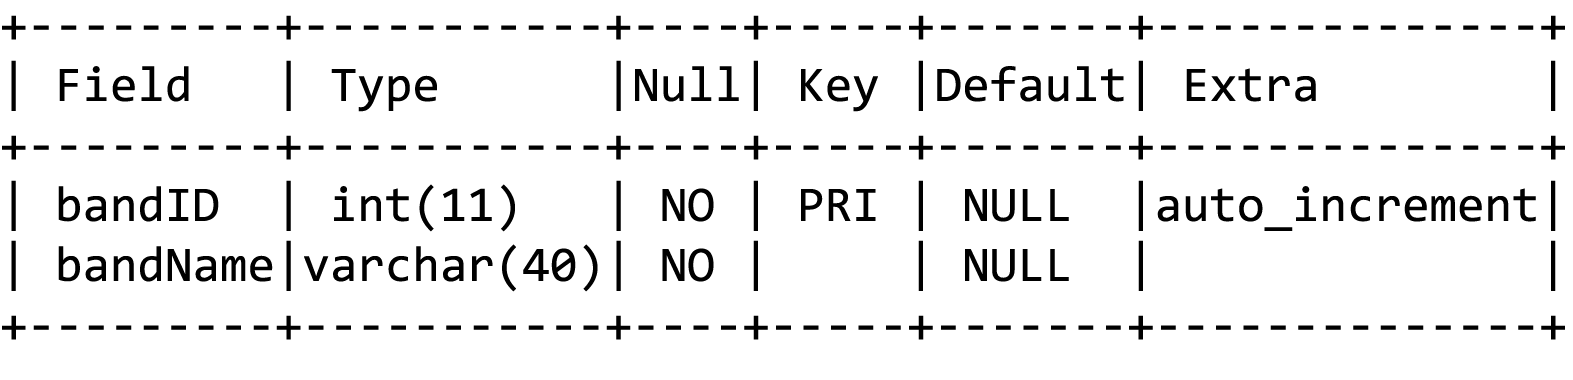 Database table after command to show more columns was typed